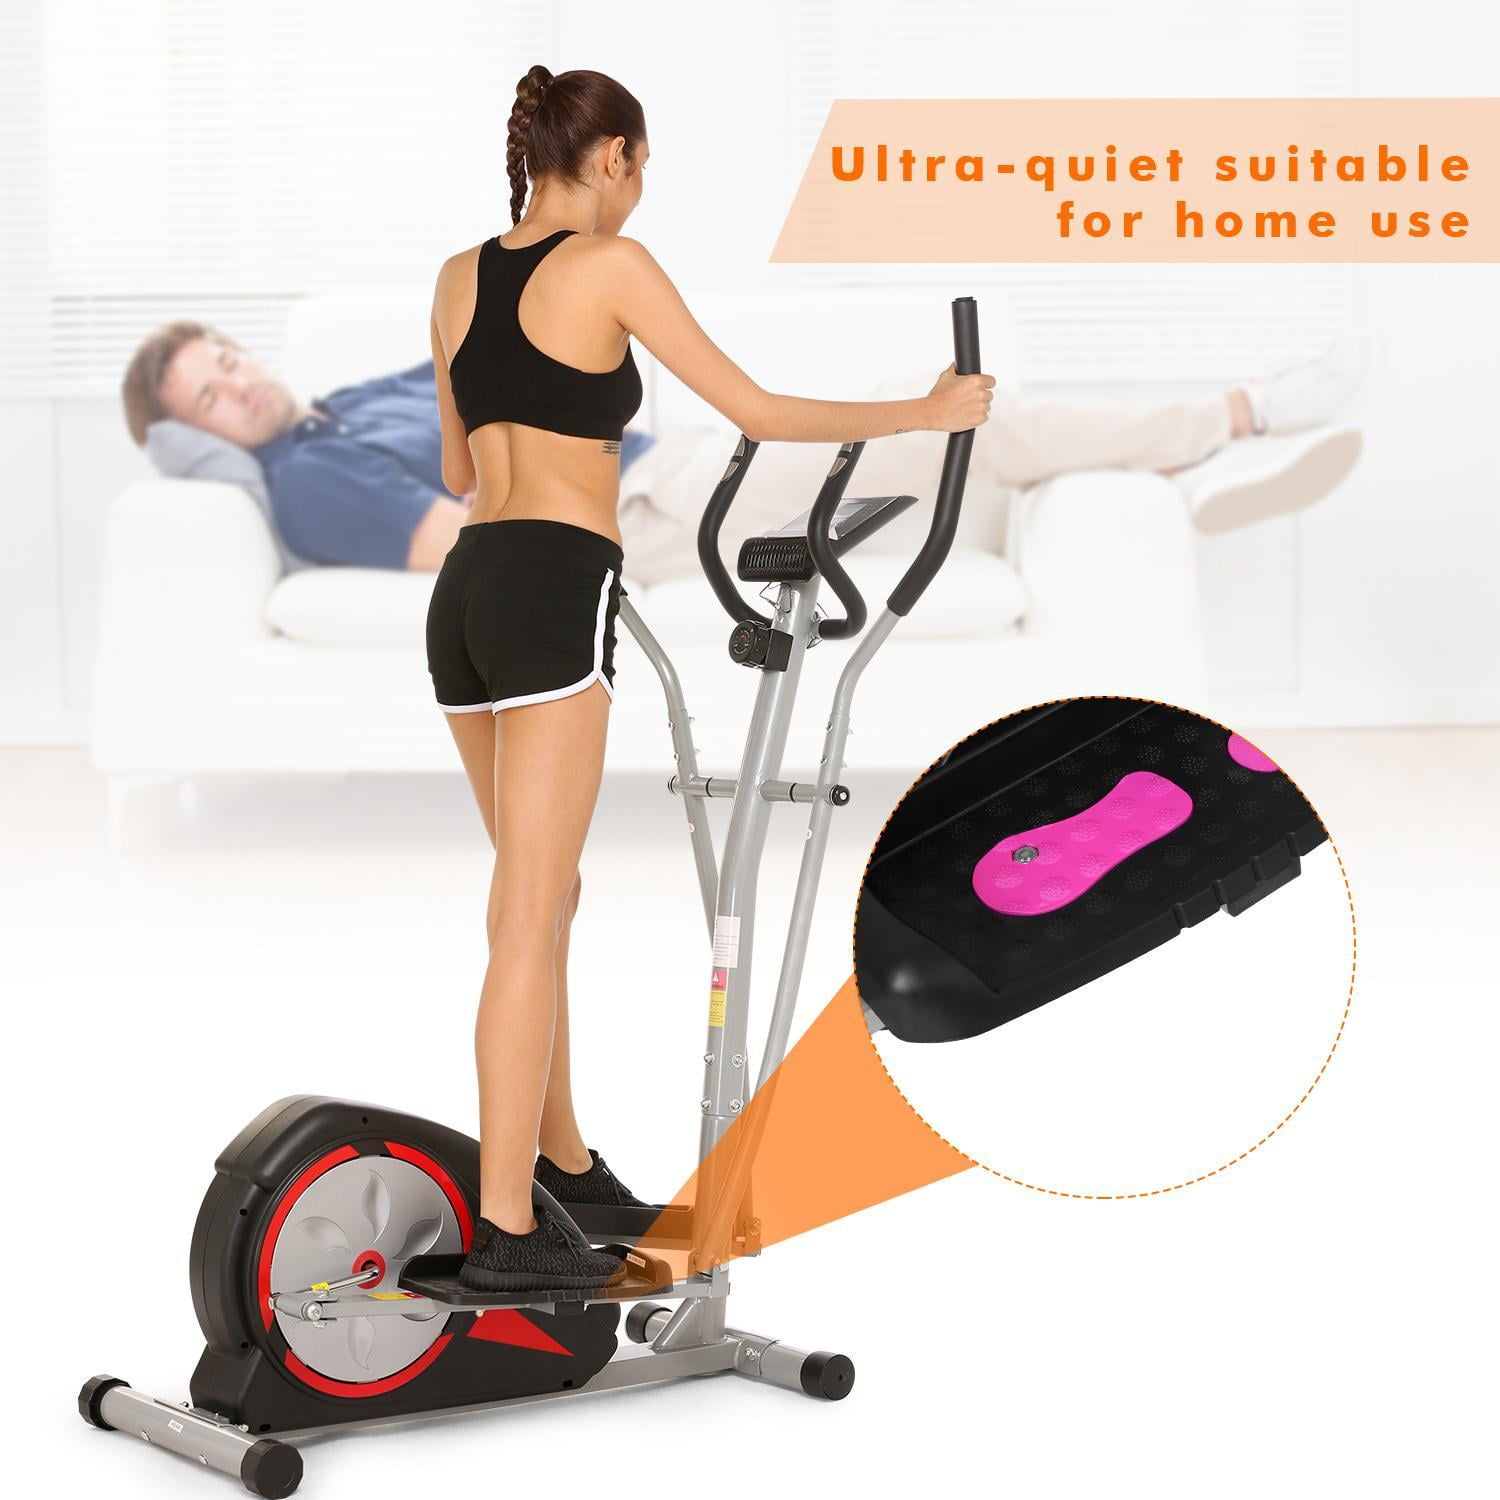 Details about   Ancheer Magnetic Elliptical Machine Exerciser Home Gym Fitness Cardio Mute 2021 